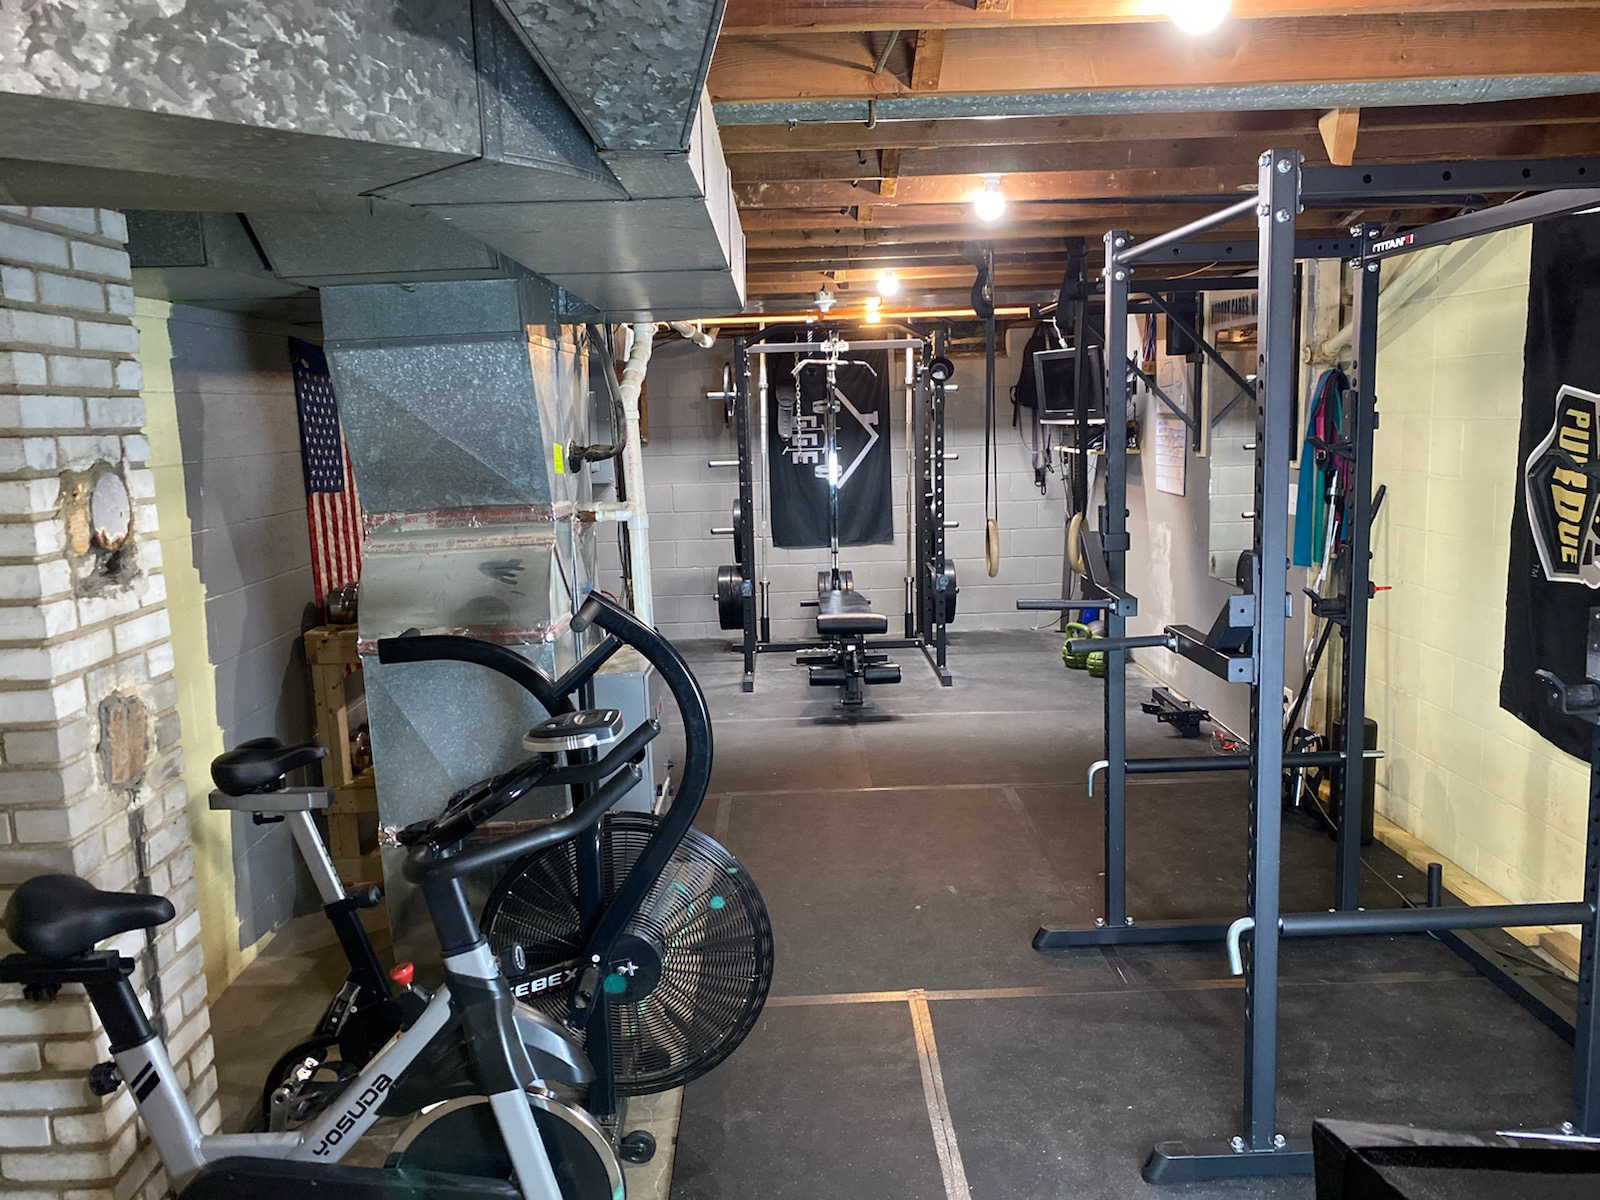 Garage Gym Flooring - Protect your Equipment and Foundation